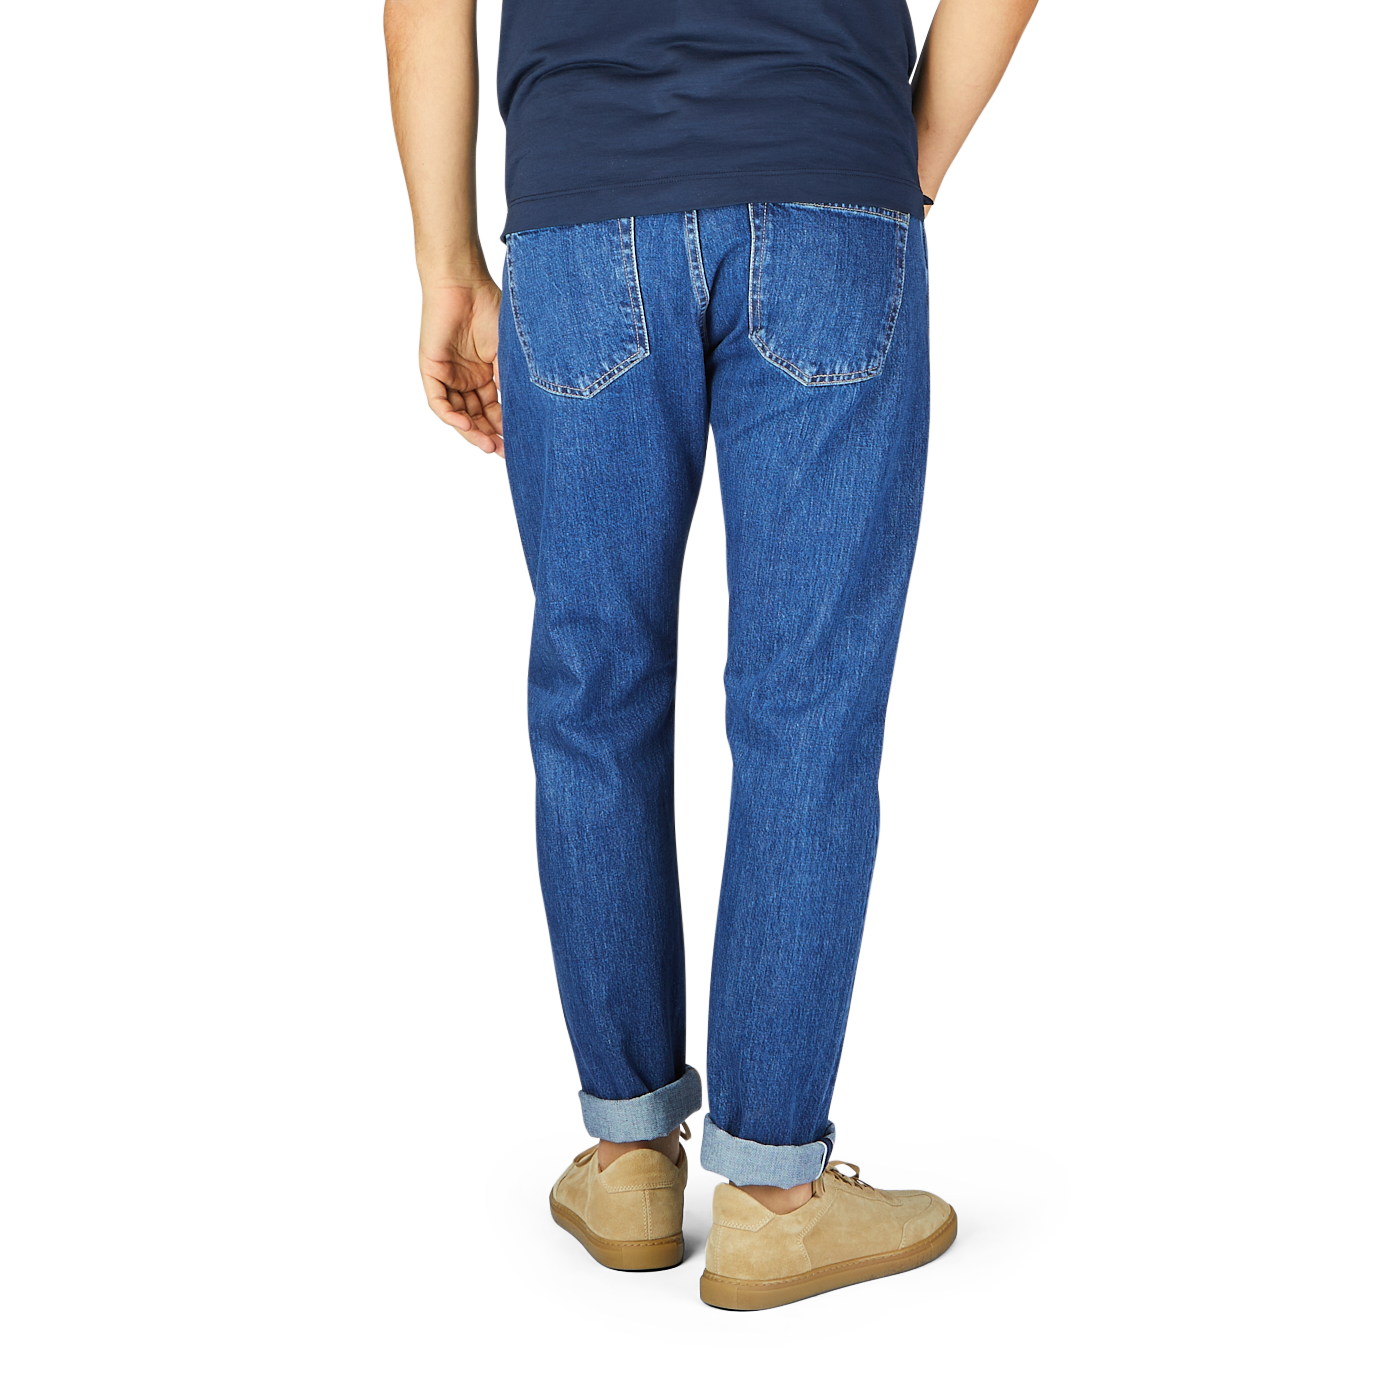 Man standing facing away, showcasing C.O.F Studio's Blue Organic Kurioki Cotton M7 6x Wash Jeans and beige shoes, with the jeans' cuffs slightly rolled up.